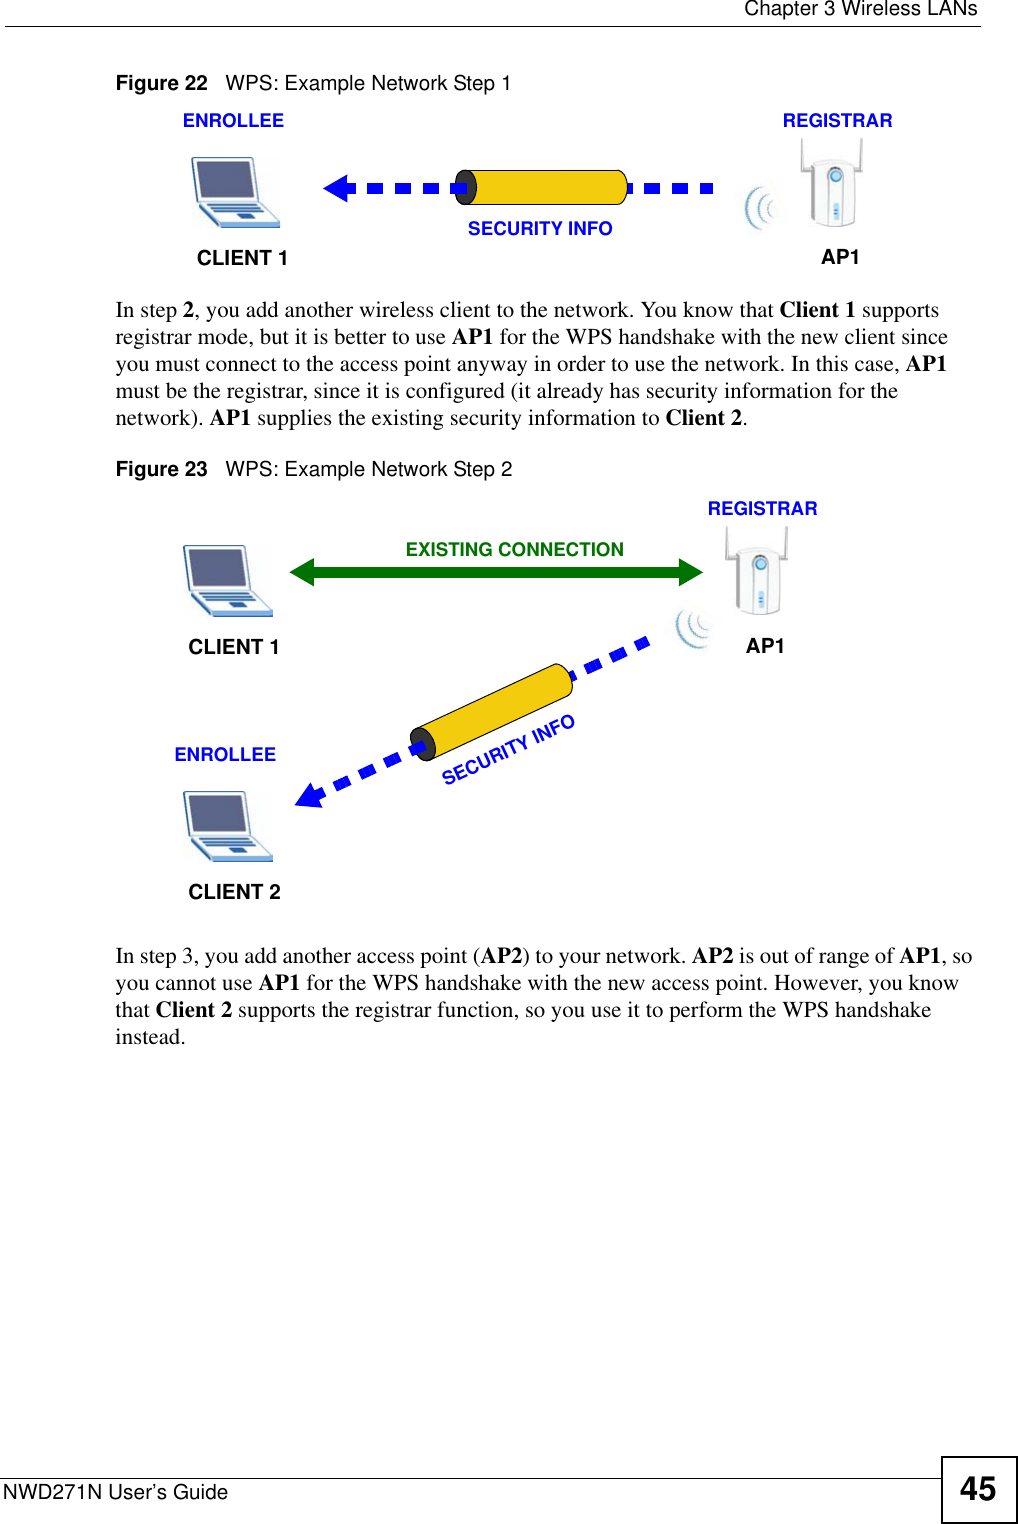  Chapter 3 Wireless LANsNWD271N User’s Guide 45Figure 22   WPS: Example Network Step 1In step 2, you add another wireless client to the network. You know that Client 1 supports registrar mode, but it is better to use AP1 for the WPS handshake with the new client since you must connect to the access point anyway in order to use the network. In this case, AP1 must be the registrar, since it is configured (it already has security information for the network). AP1 supplies the existing security information to Client 2.Figure 23   WPS: Example Network Step 2In step 3, you add another access point (AP2) to your network. AP2 is out of range of AP1, so you cannot use AP1 for the WPS handshake with the new access point. However, you know that Client 2 supports the registrar function, so you use it to perform the WPS handshake instead.REGISTRARENROLLEESECURITY INFOCLIENT 1 AP1REGISTRARCLIENT 1 AP1ENROLLEECLIENT 2EXISTING CONNECTIONSECURITY INFO